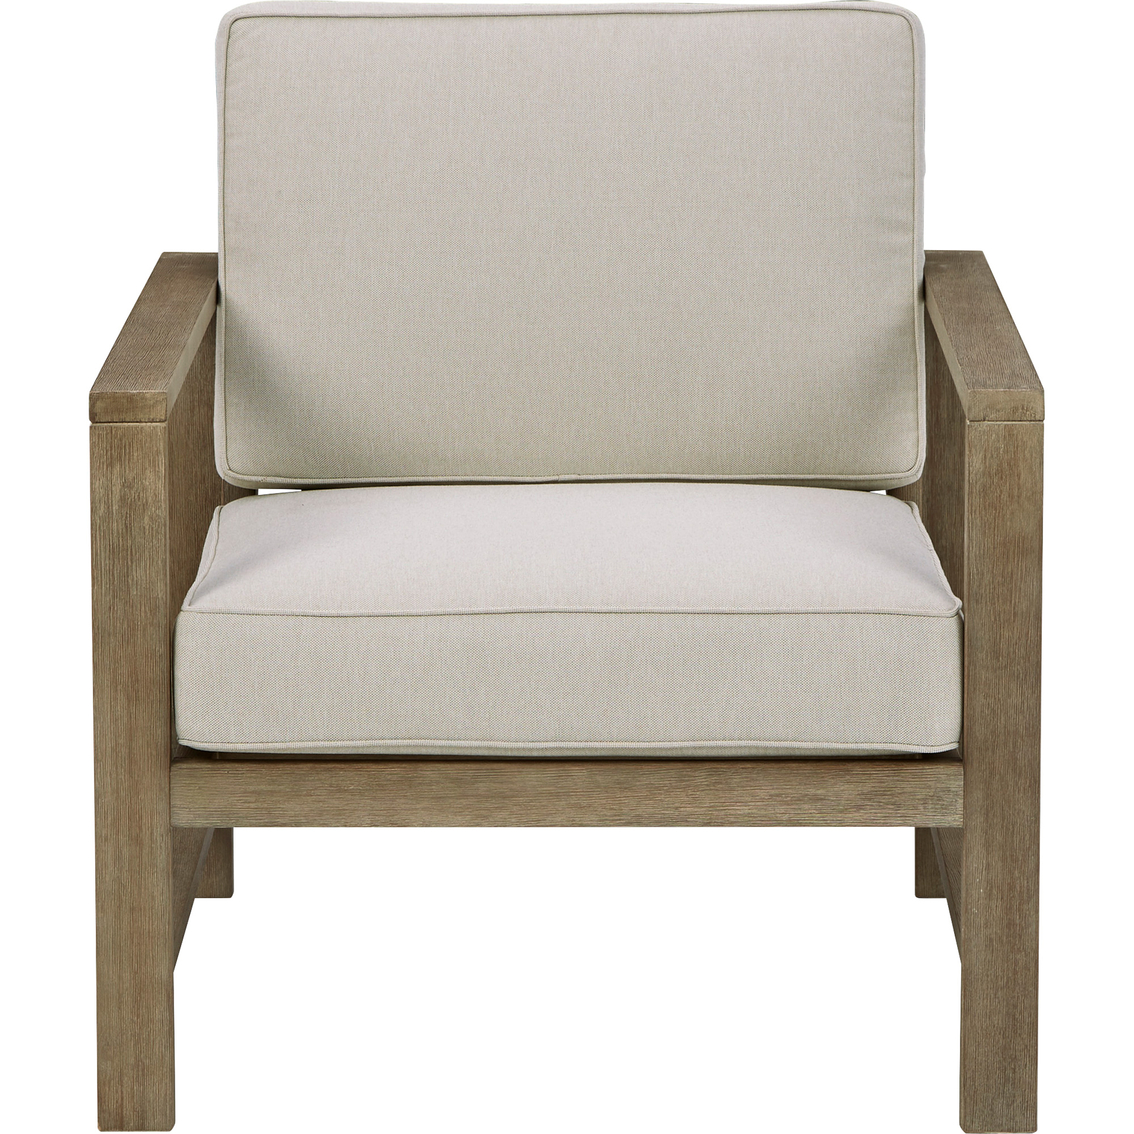 Signature Design by Ashley Fynnegan Lounge Chair 2 pk. - Image 3 of 4